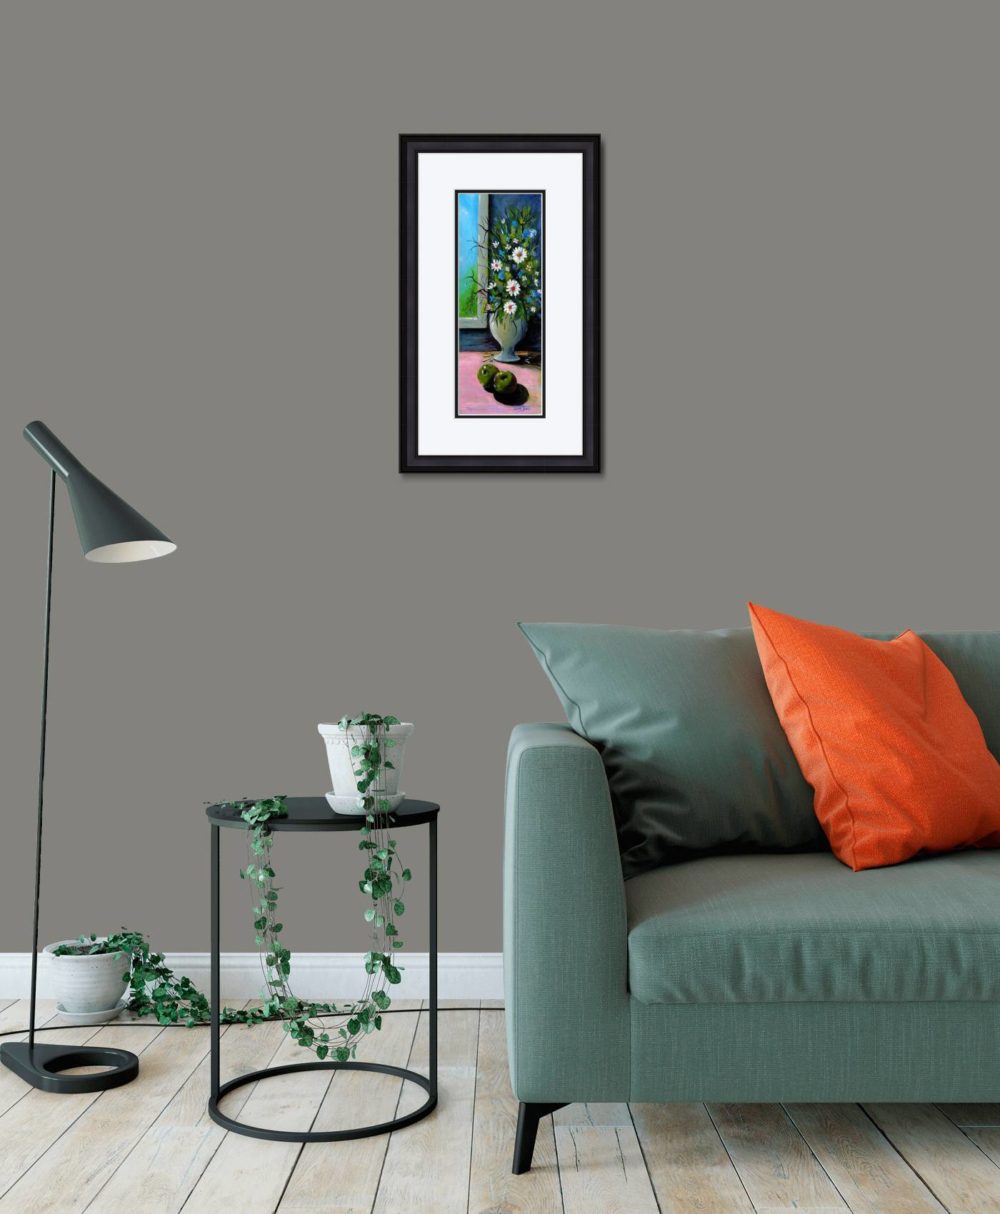 Apples and Daisies Print (Small) In Black Frame In Room